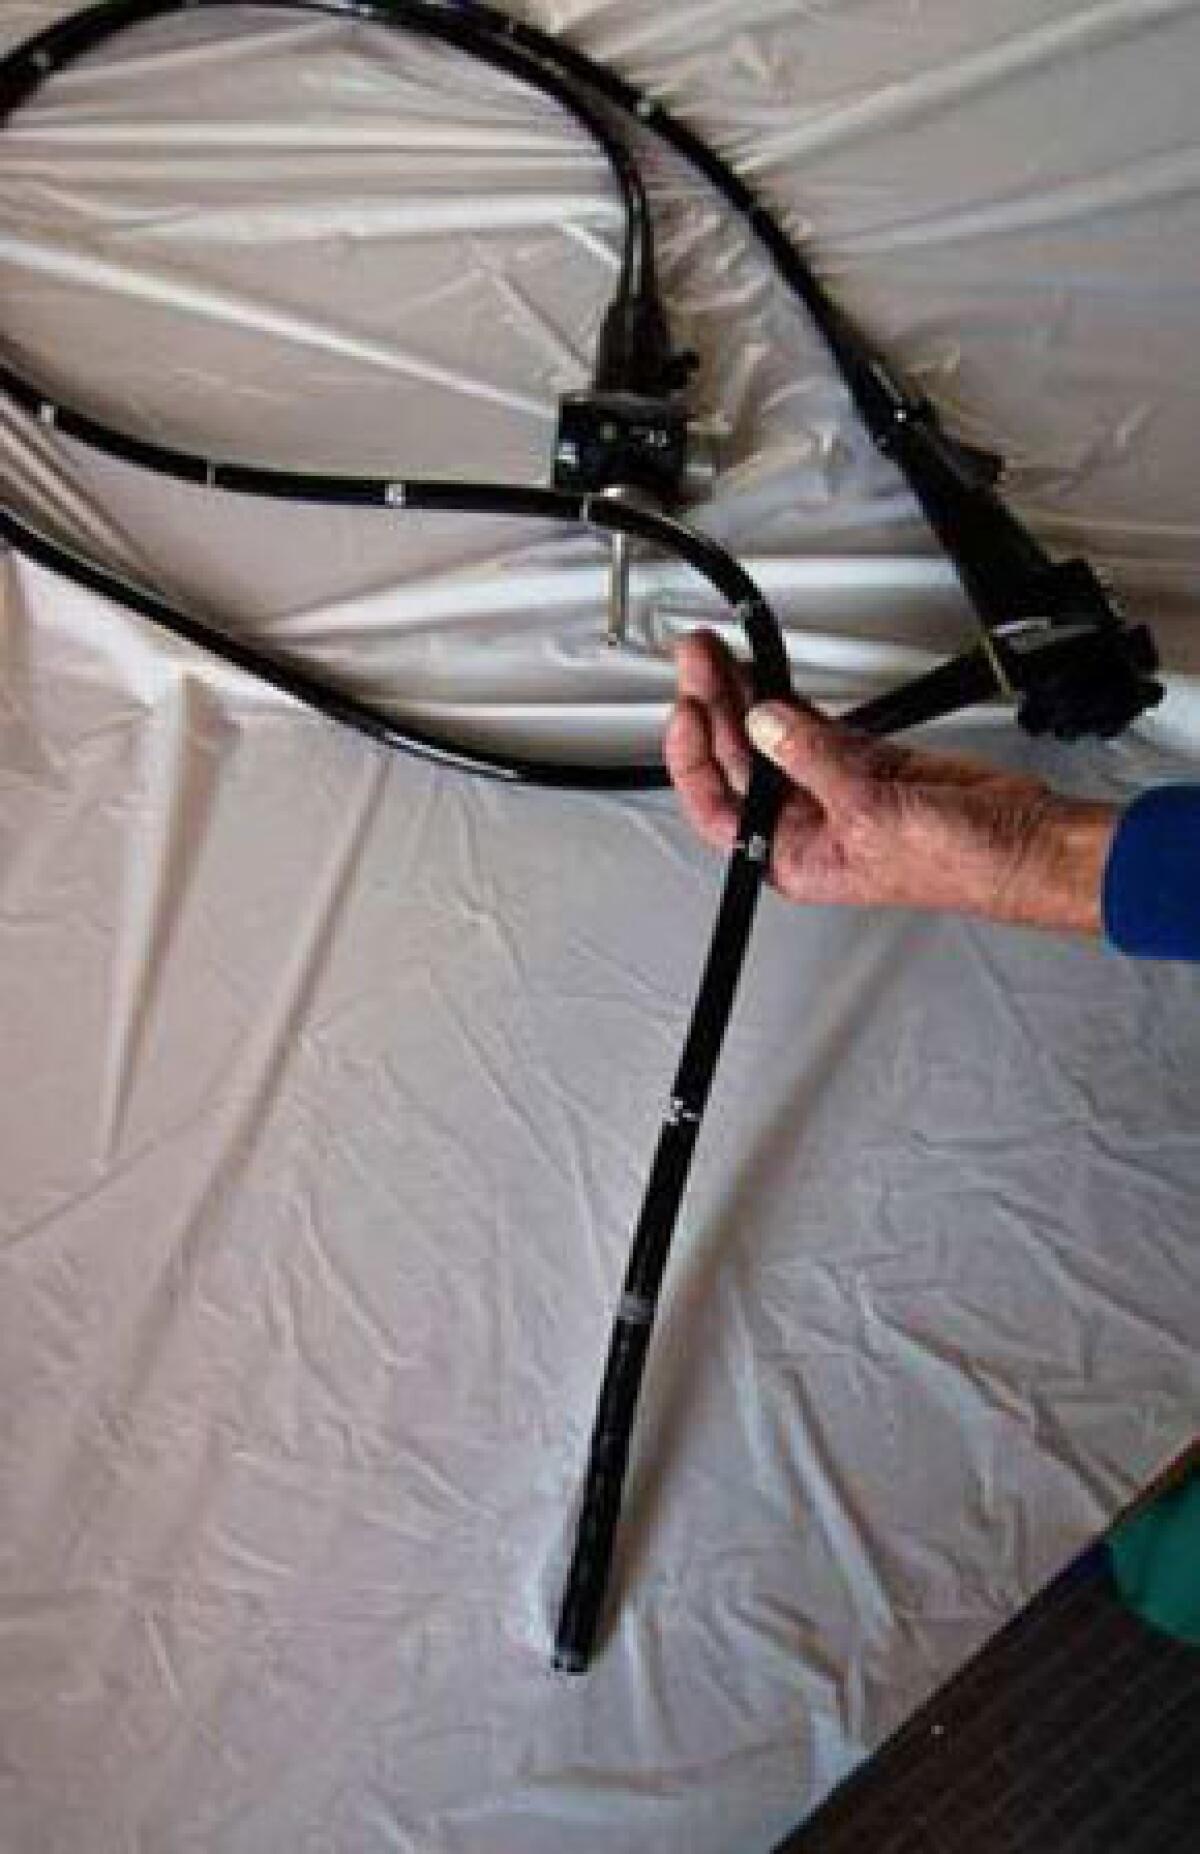 An endoscope used in colon examinations. Three in 20 instruments failed a recent cleanliness test.